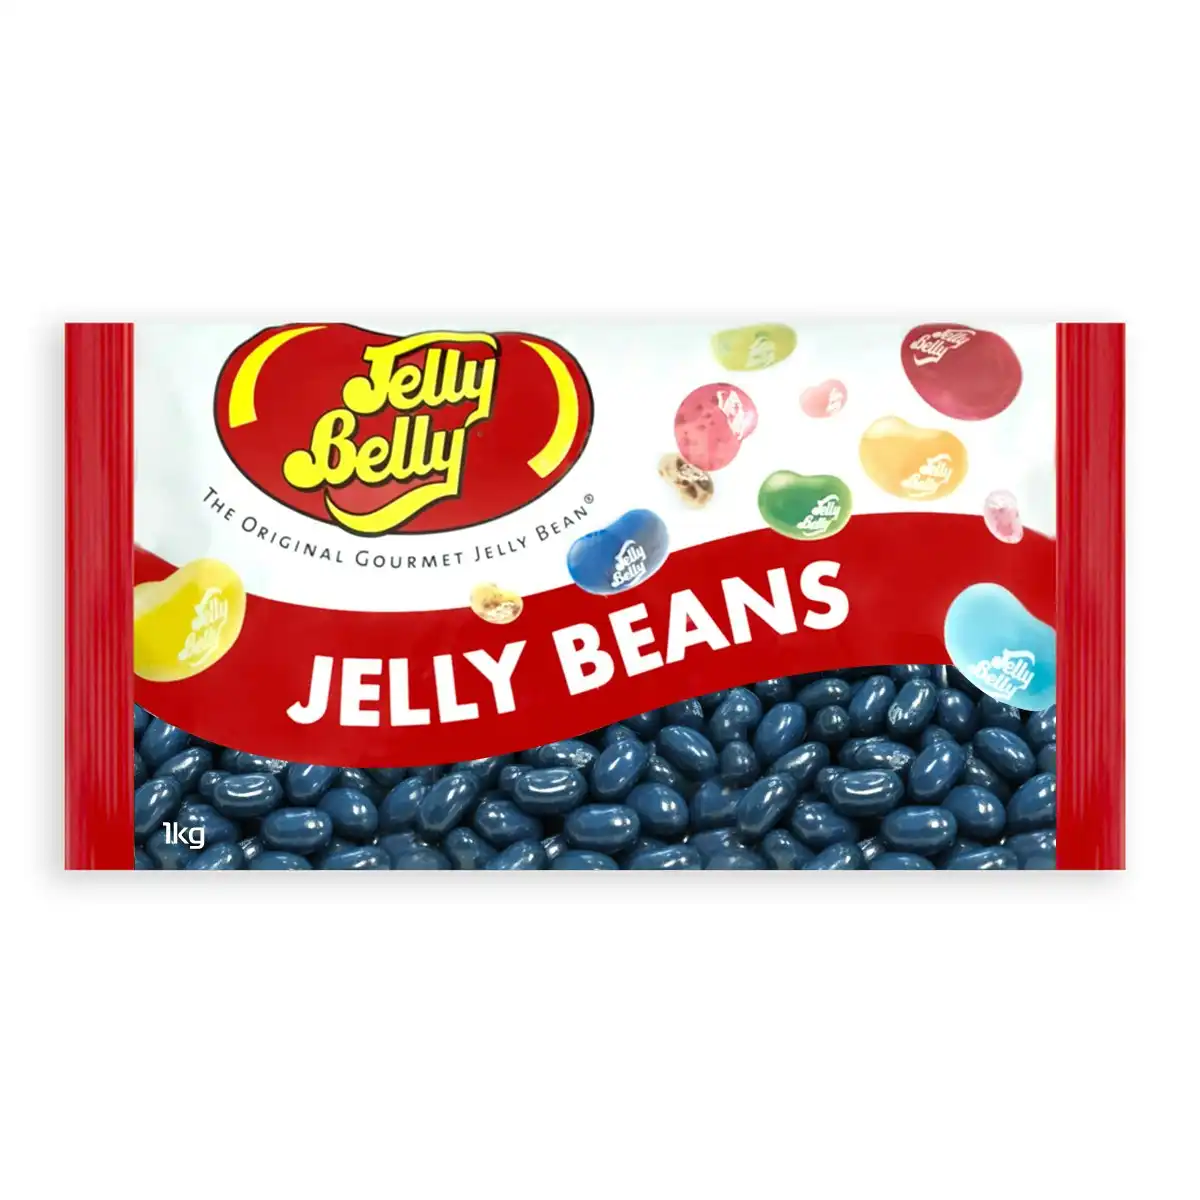 Jelly Belly Blueberry 1kg Jelly Bean Bag Chewy Sweet Confectionery Candy/Lollies